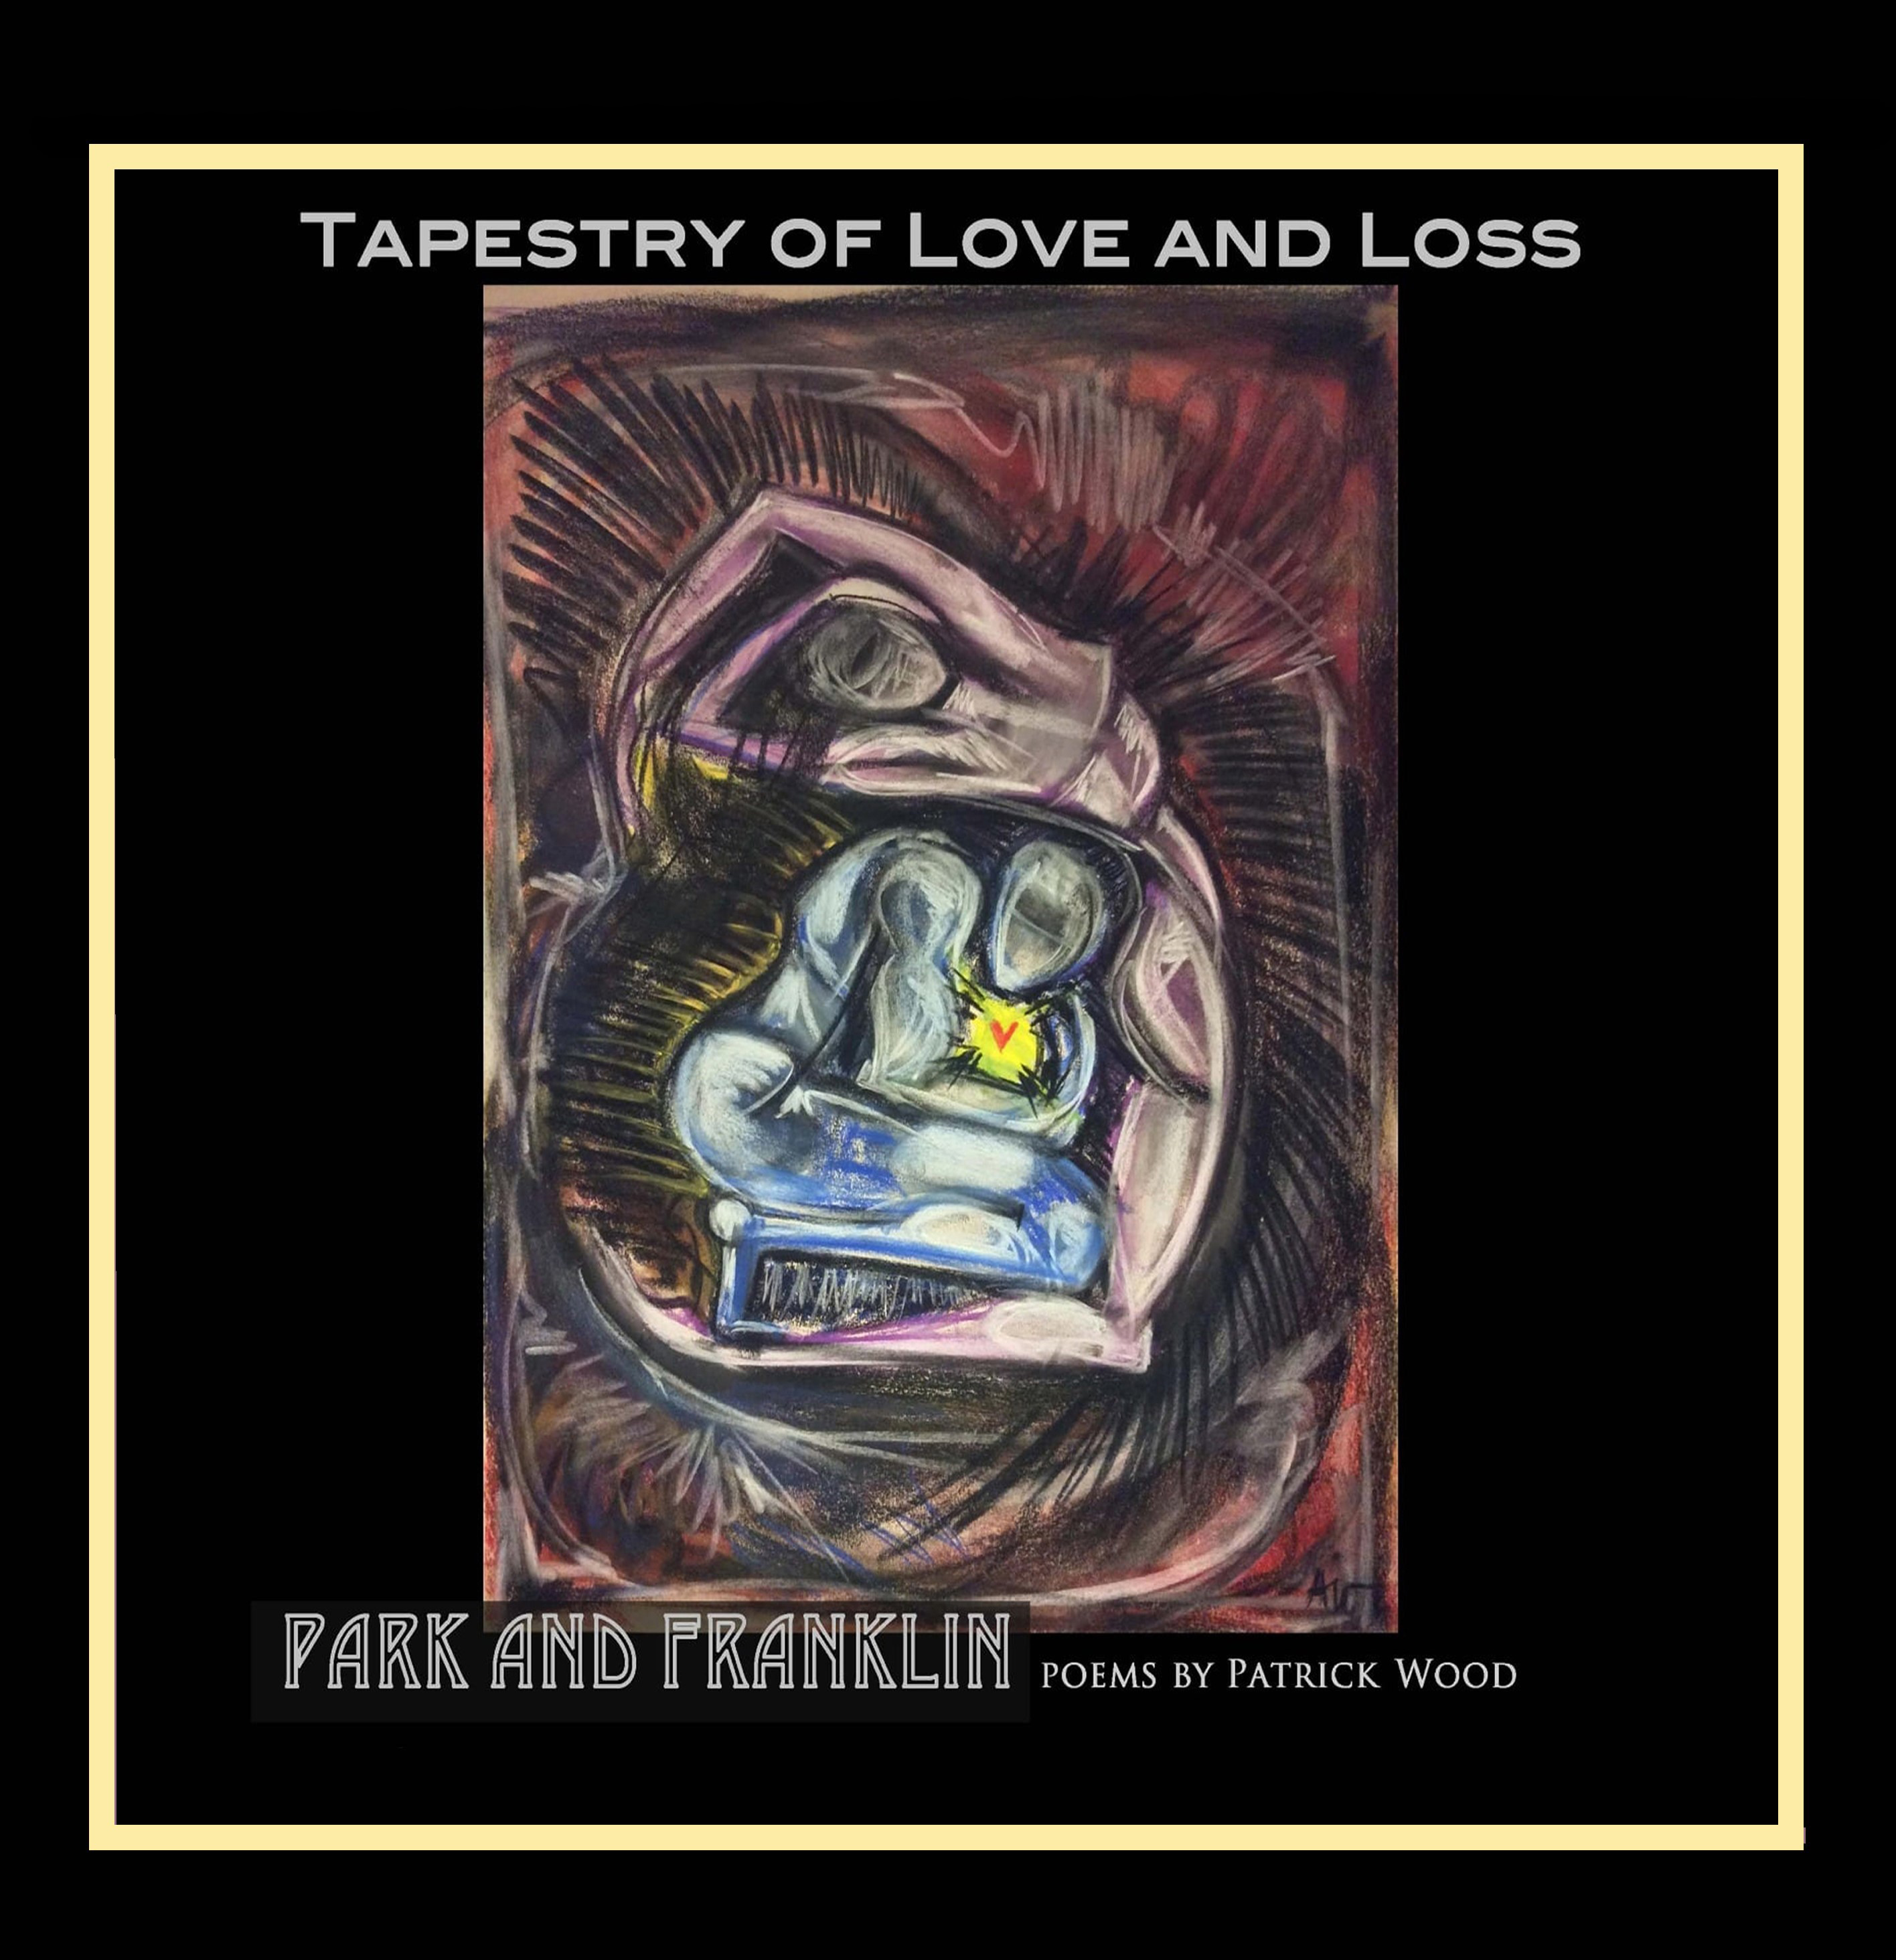 poems, mmc, tapestry of love and loss